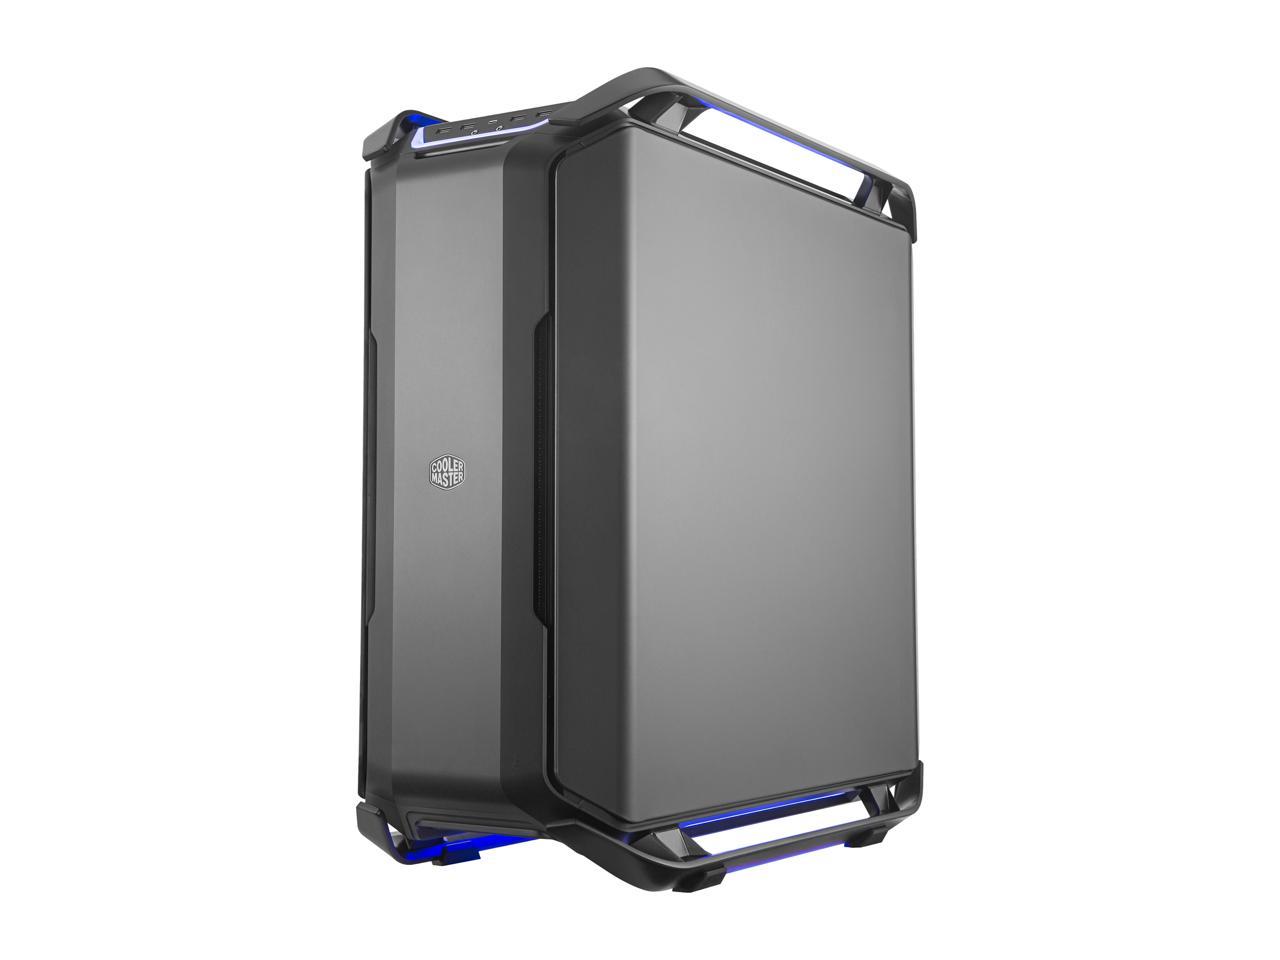 Cooler Master Cosmos C700P Black Edition E-ATX Full-Tower with Curved Tempered Glass Side Panel, Flexible Interior layout, RGB Lighting control, Type-C port and diverse liquid cooling layout